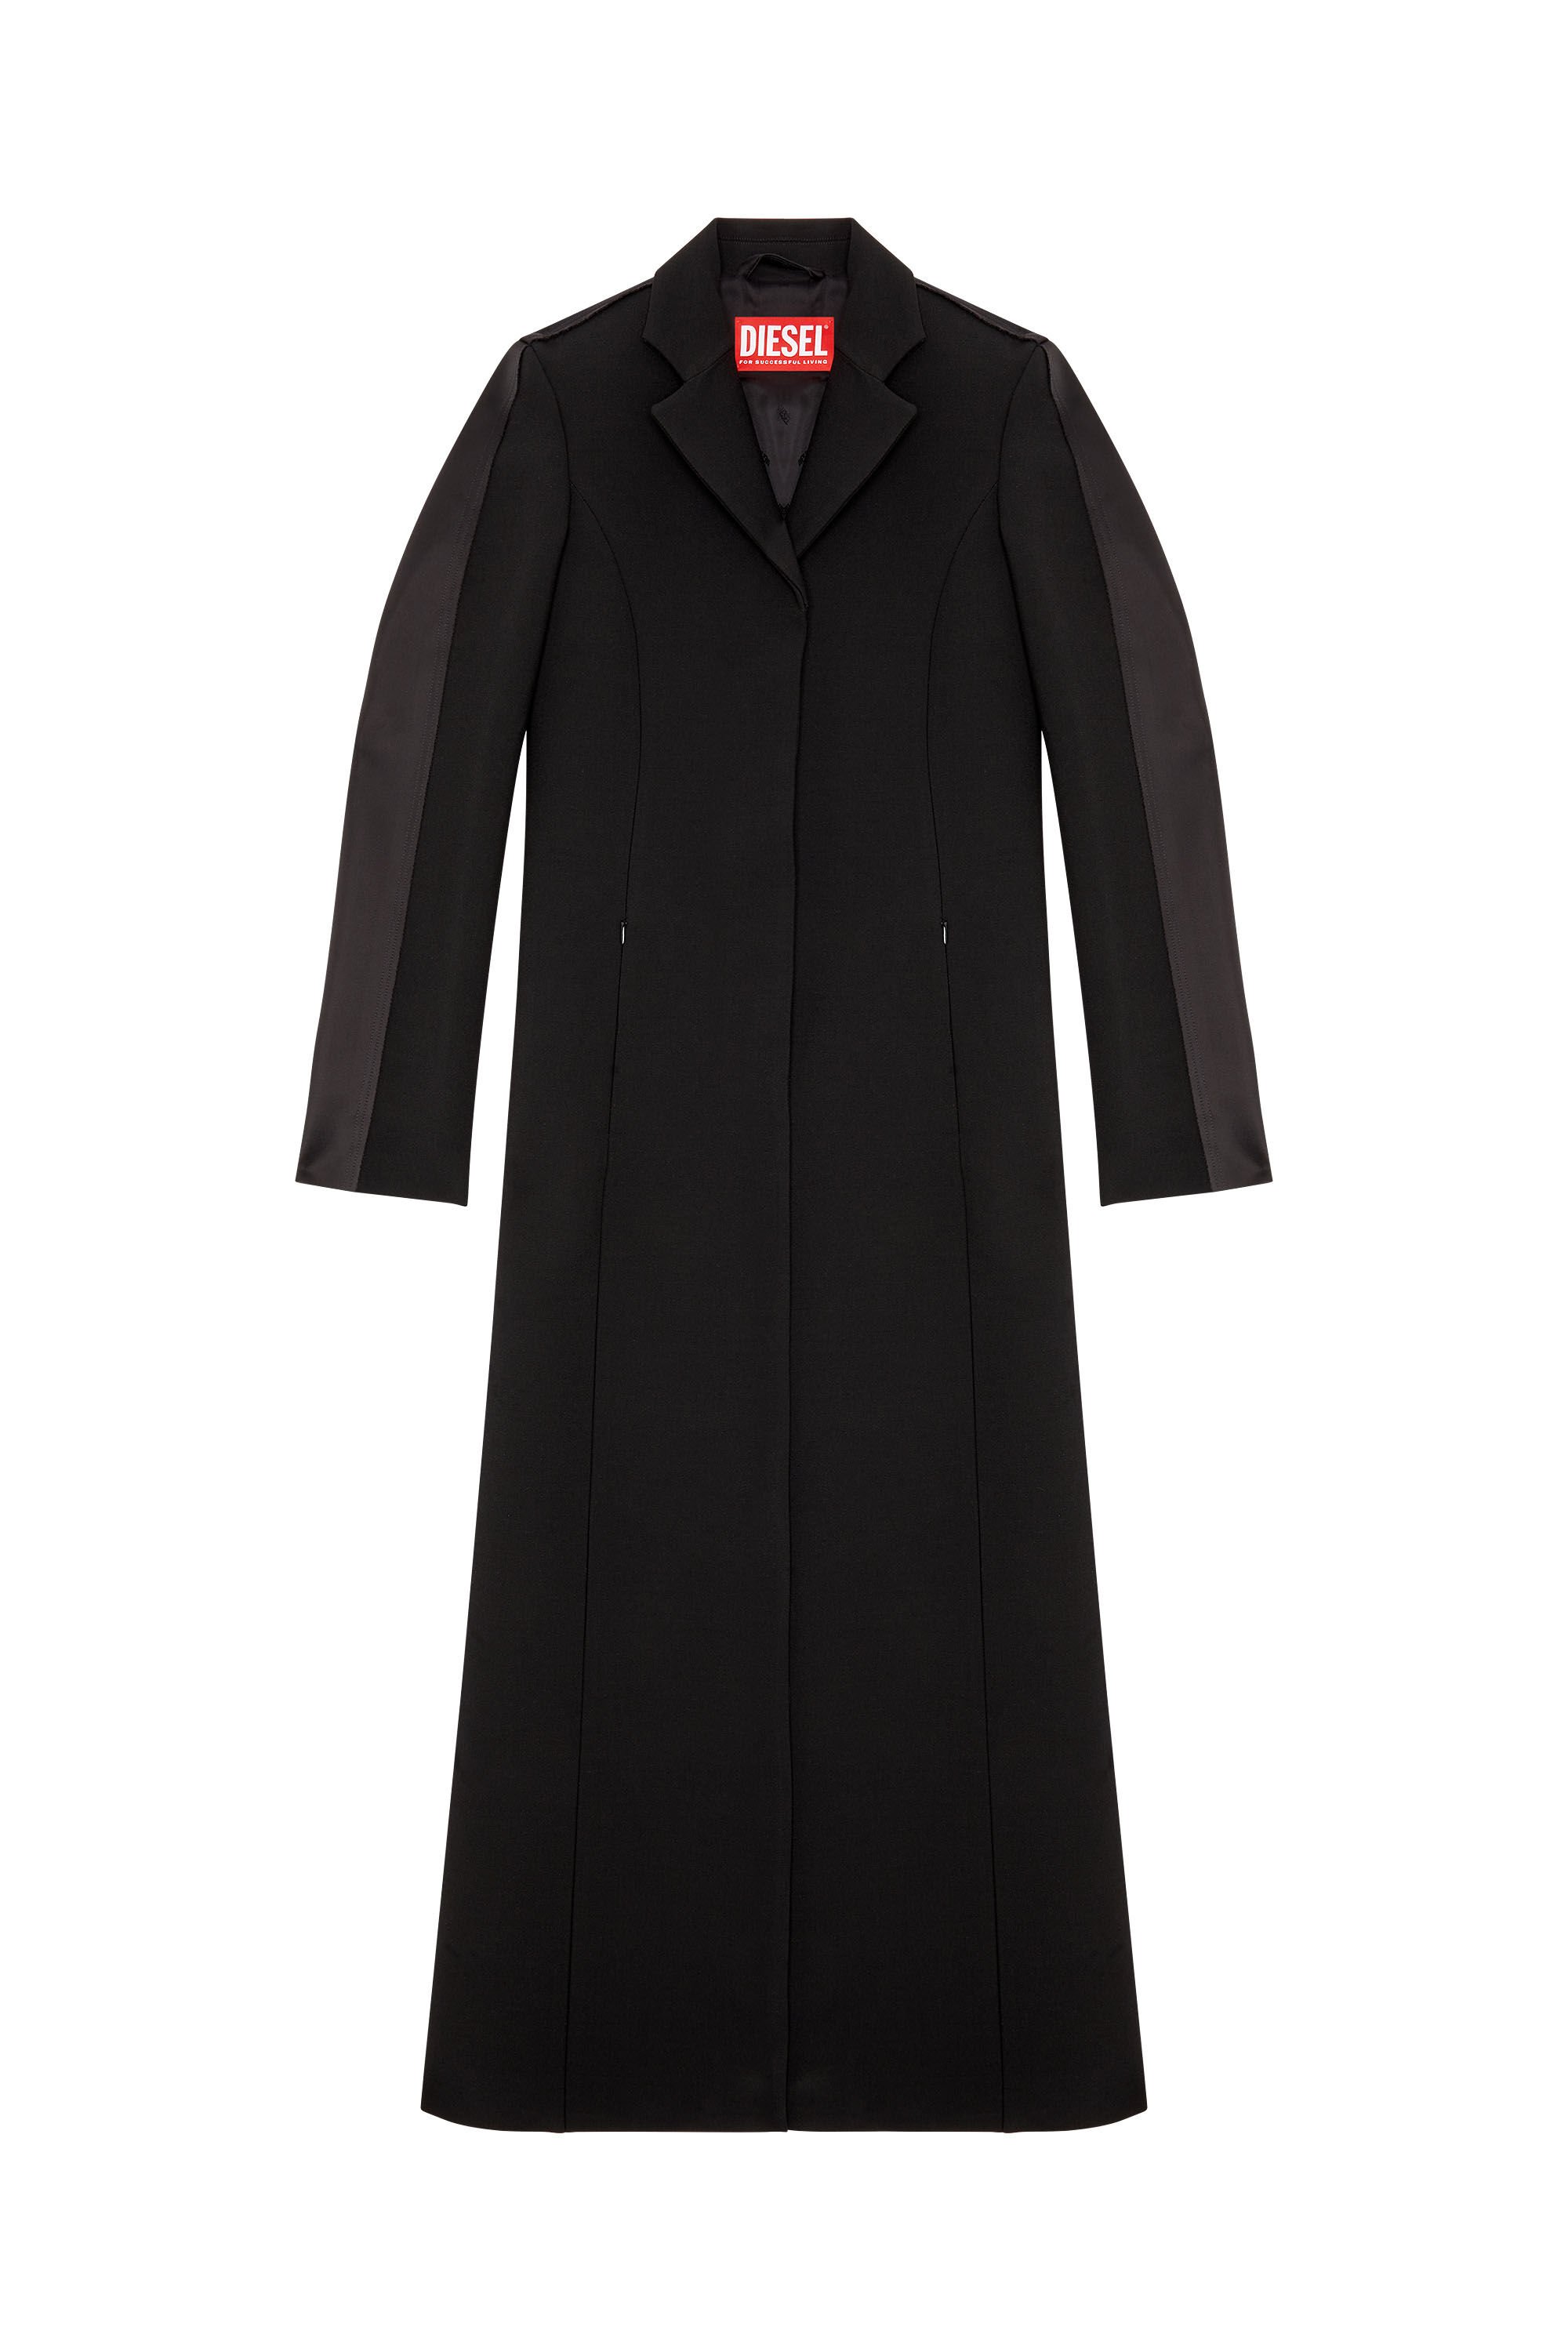 Diesel - G-FINE, Woman Long coat in cool wool and tech fabric in Black - Image 2